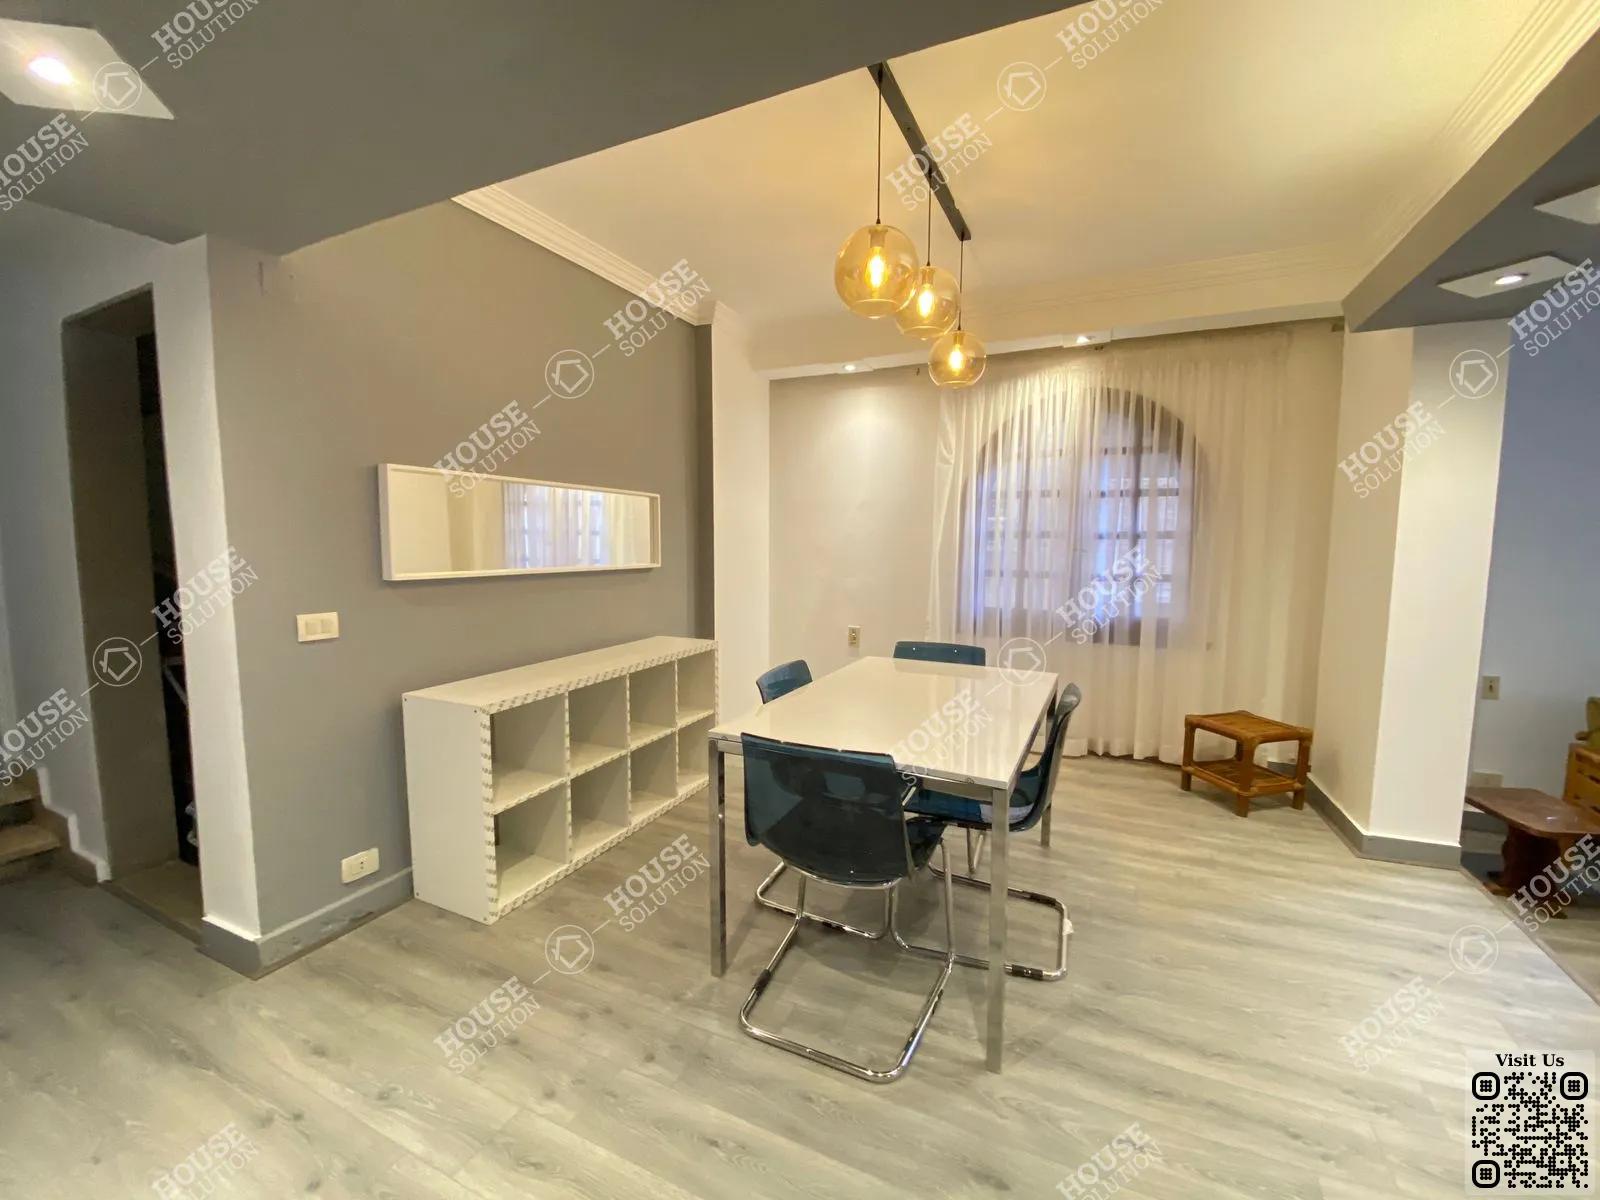 DINING AREA @ Apartments For Rent In Maadi Maadi Degla Area: 280 m² consists of 3 Bedrooms 3 Bathrooms Modern furnished 5 stars #5408-1